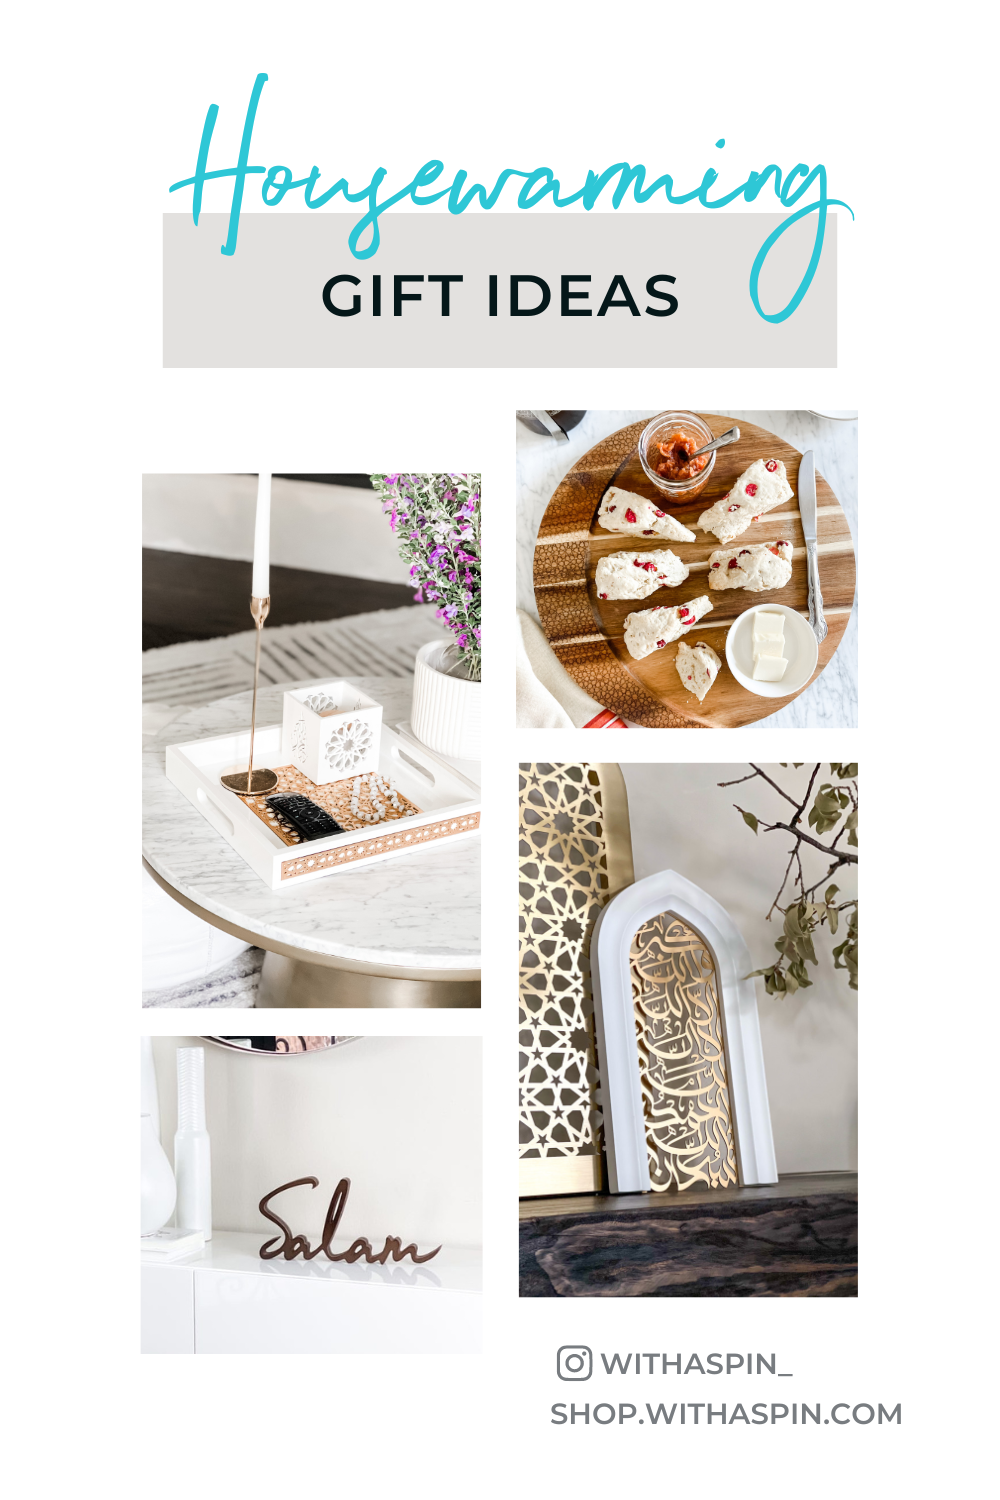 Best Housewarming Gift Items for New Home Ceremony